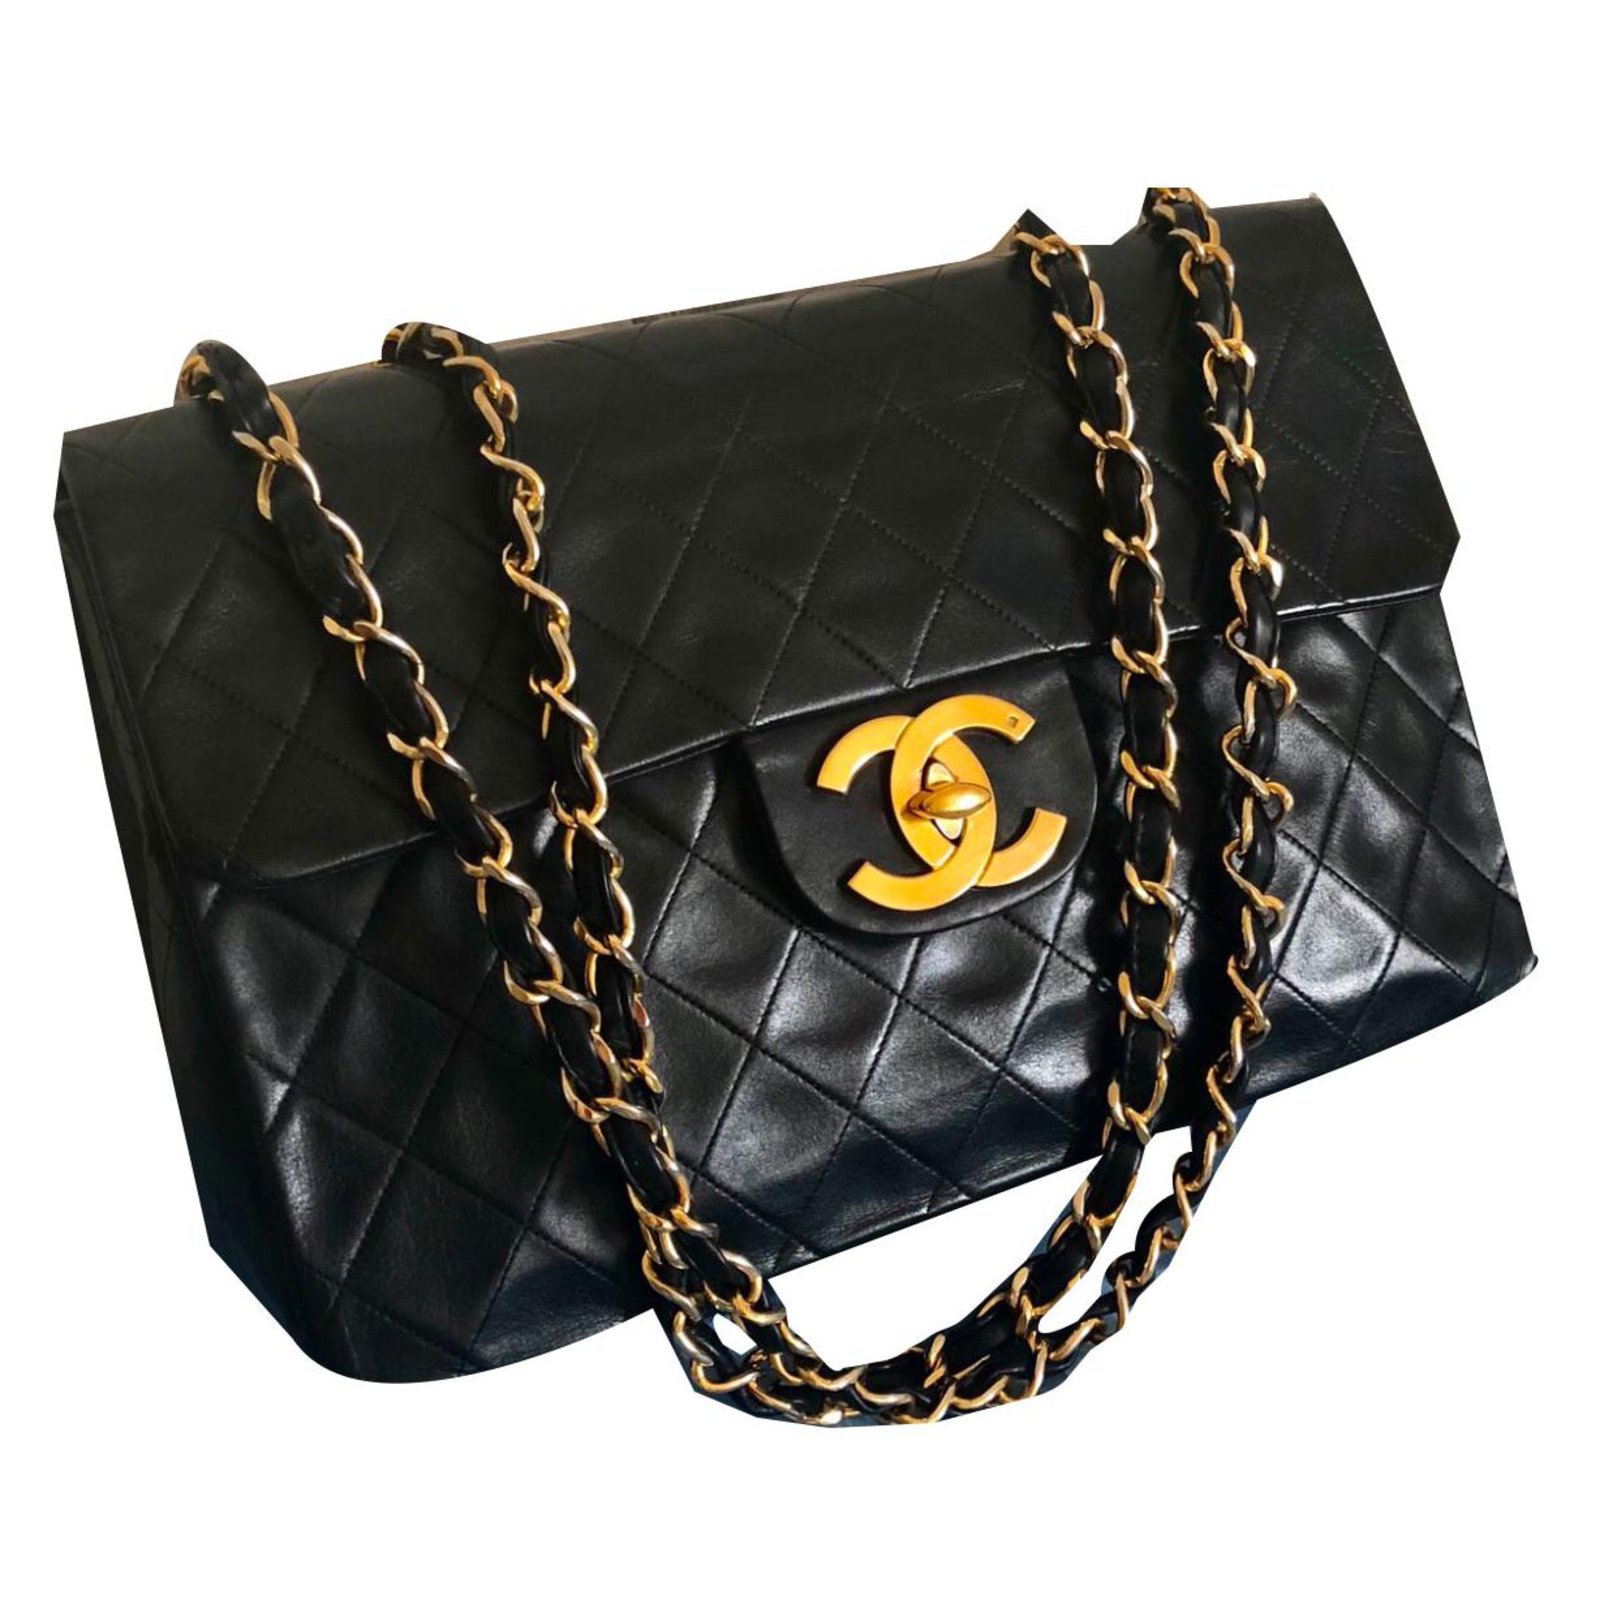 Chanel 34 Chanel 13inch Maxi Jumbo Black Quilted Leather Shoulder